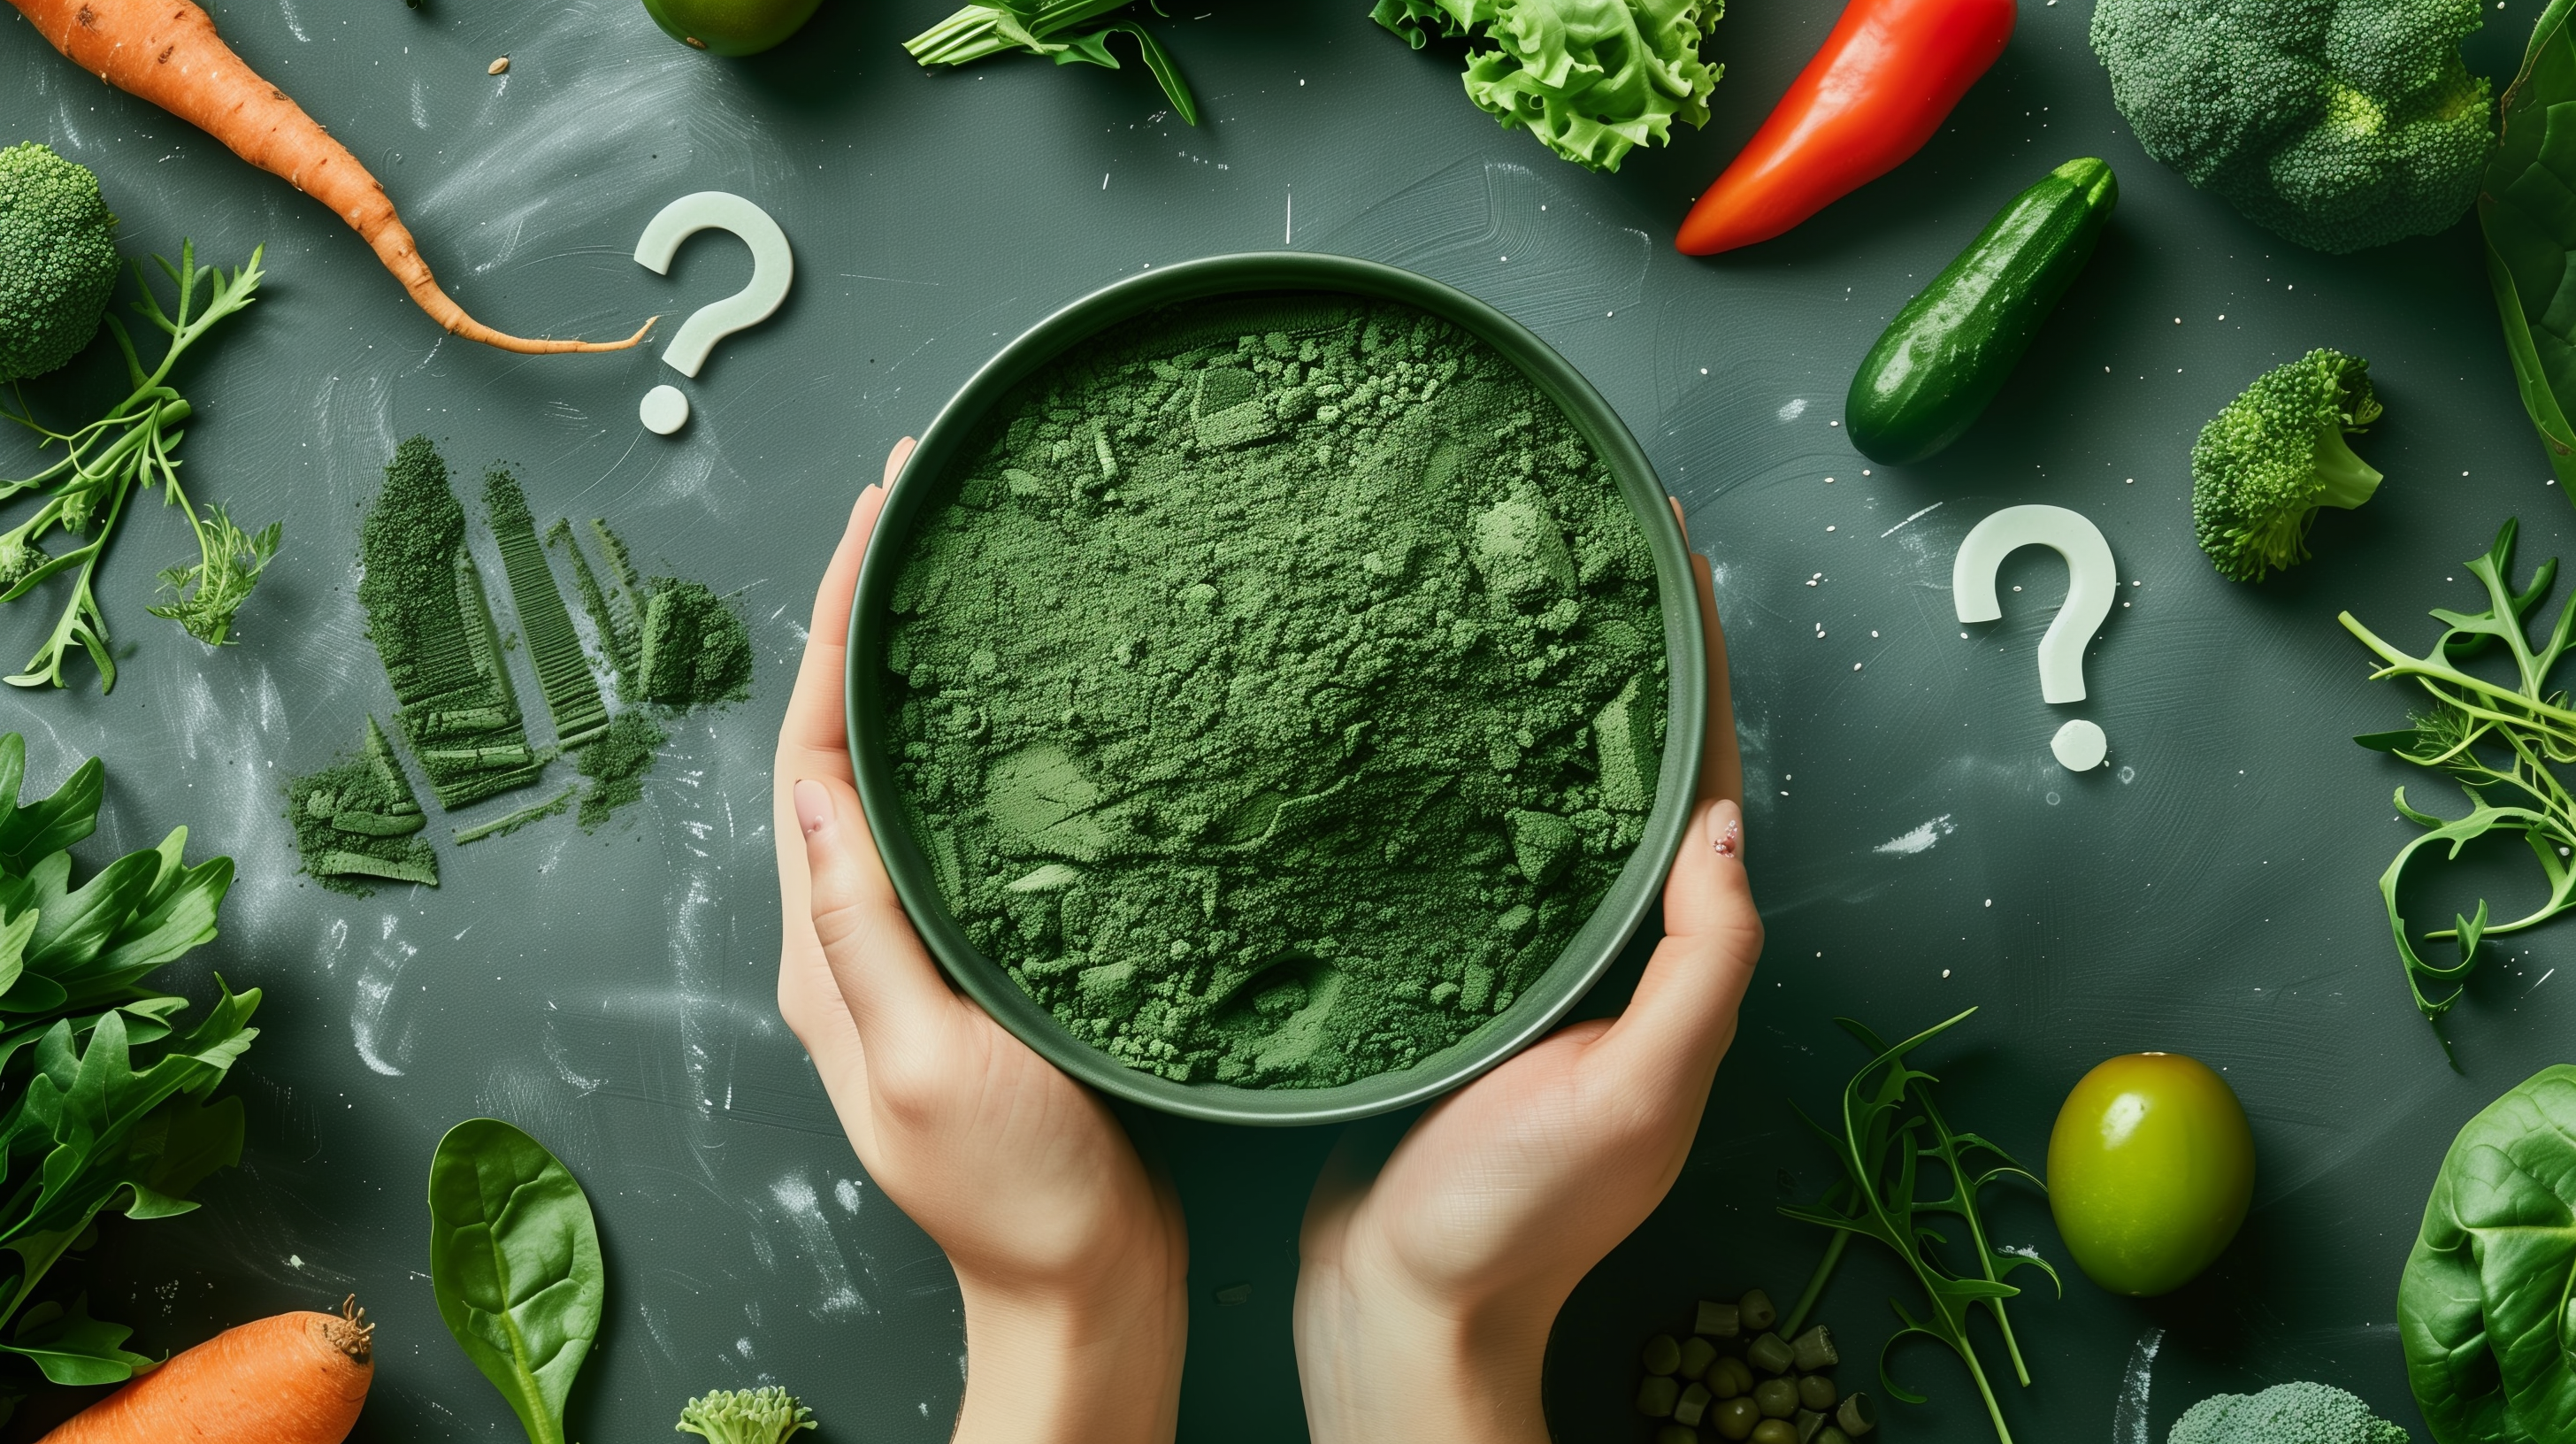 vibrant green powder container, with scattered vegetables and question marks around it